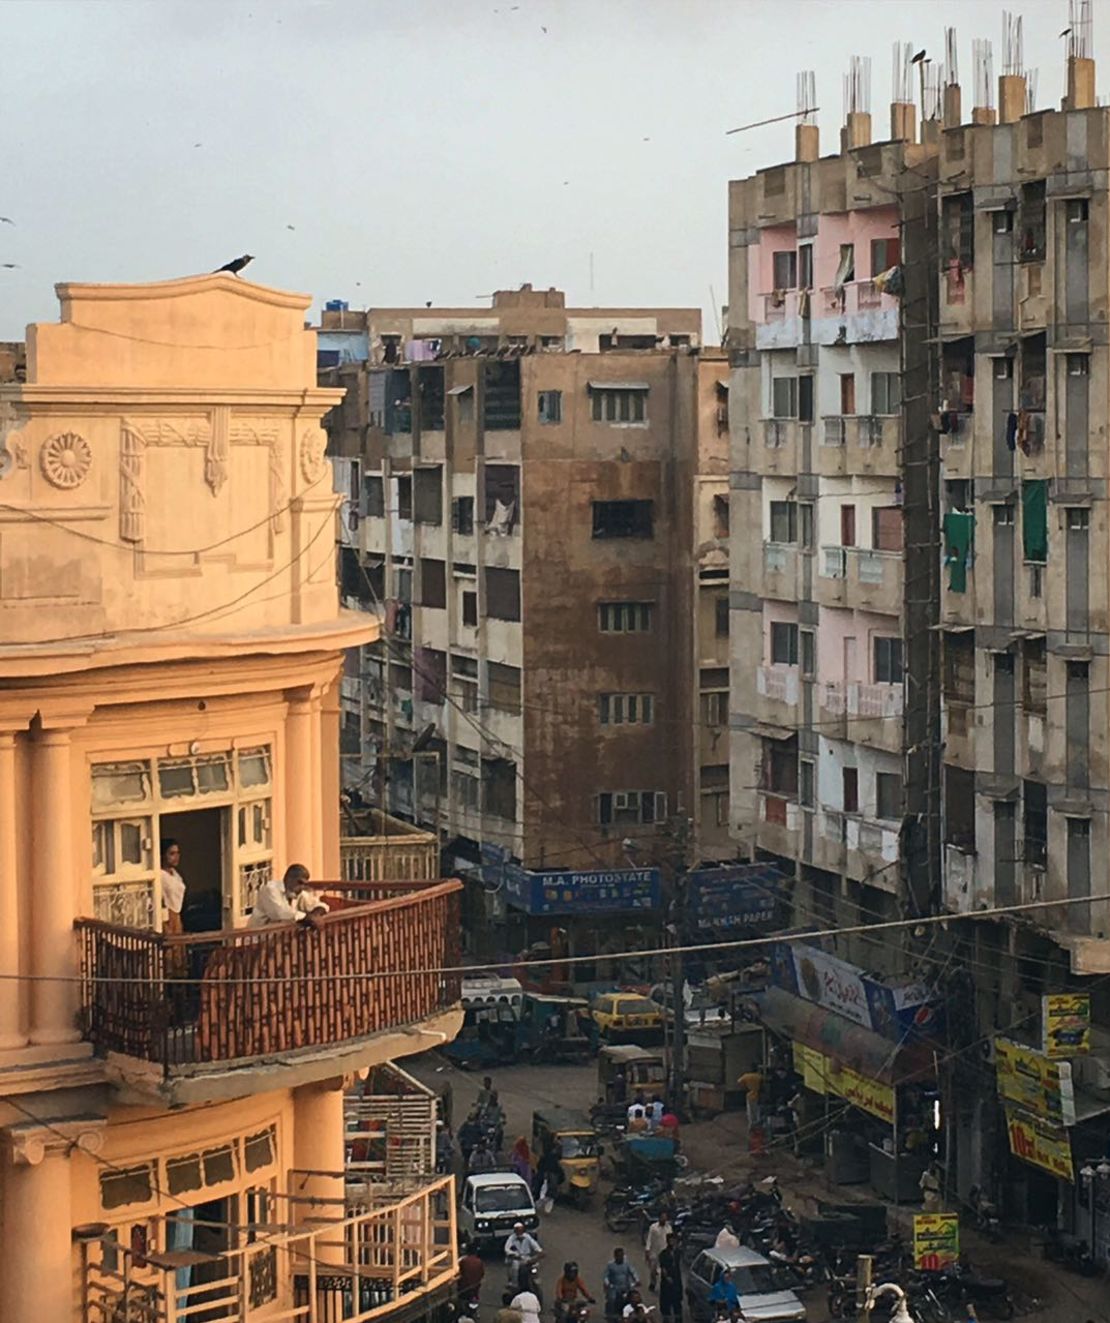 Karachi, the most populous city in Pakistan, is where old meets new with crumbling colonial buildings facing modern concrete office blocks.